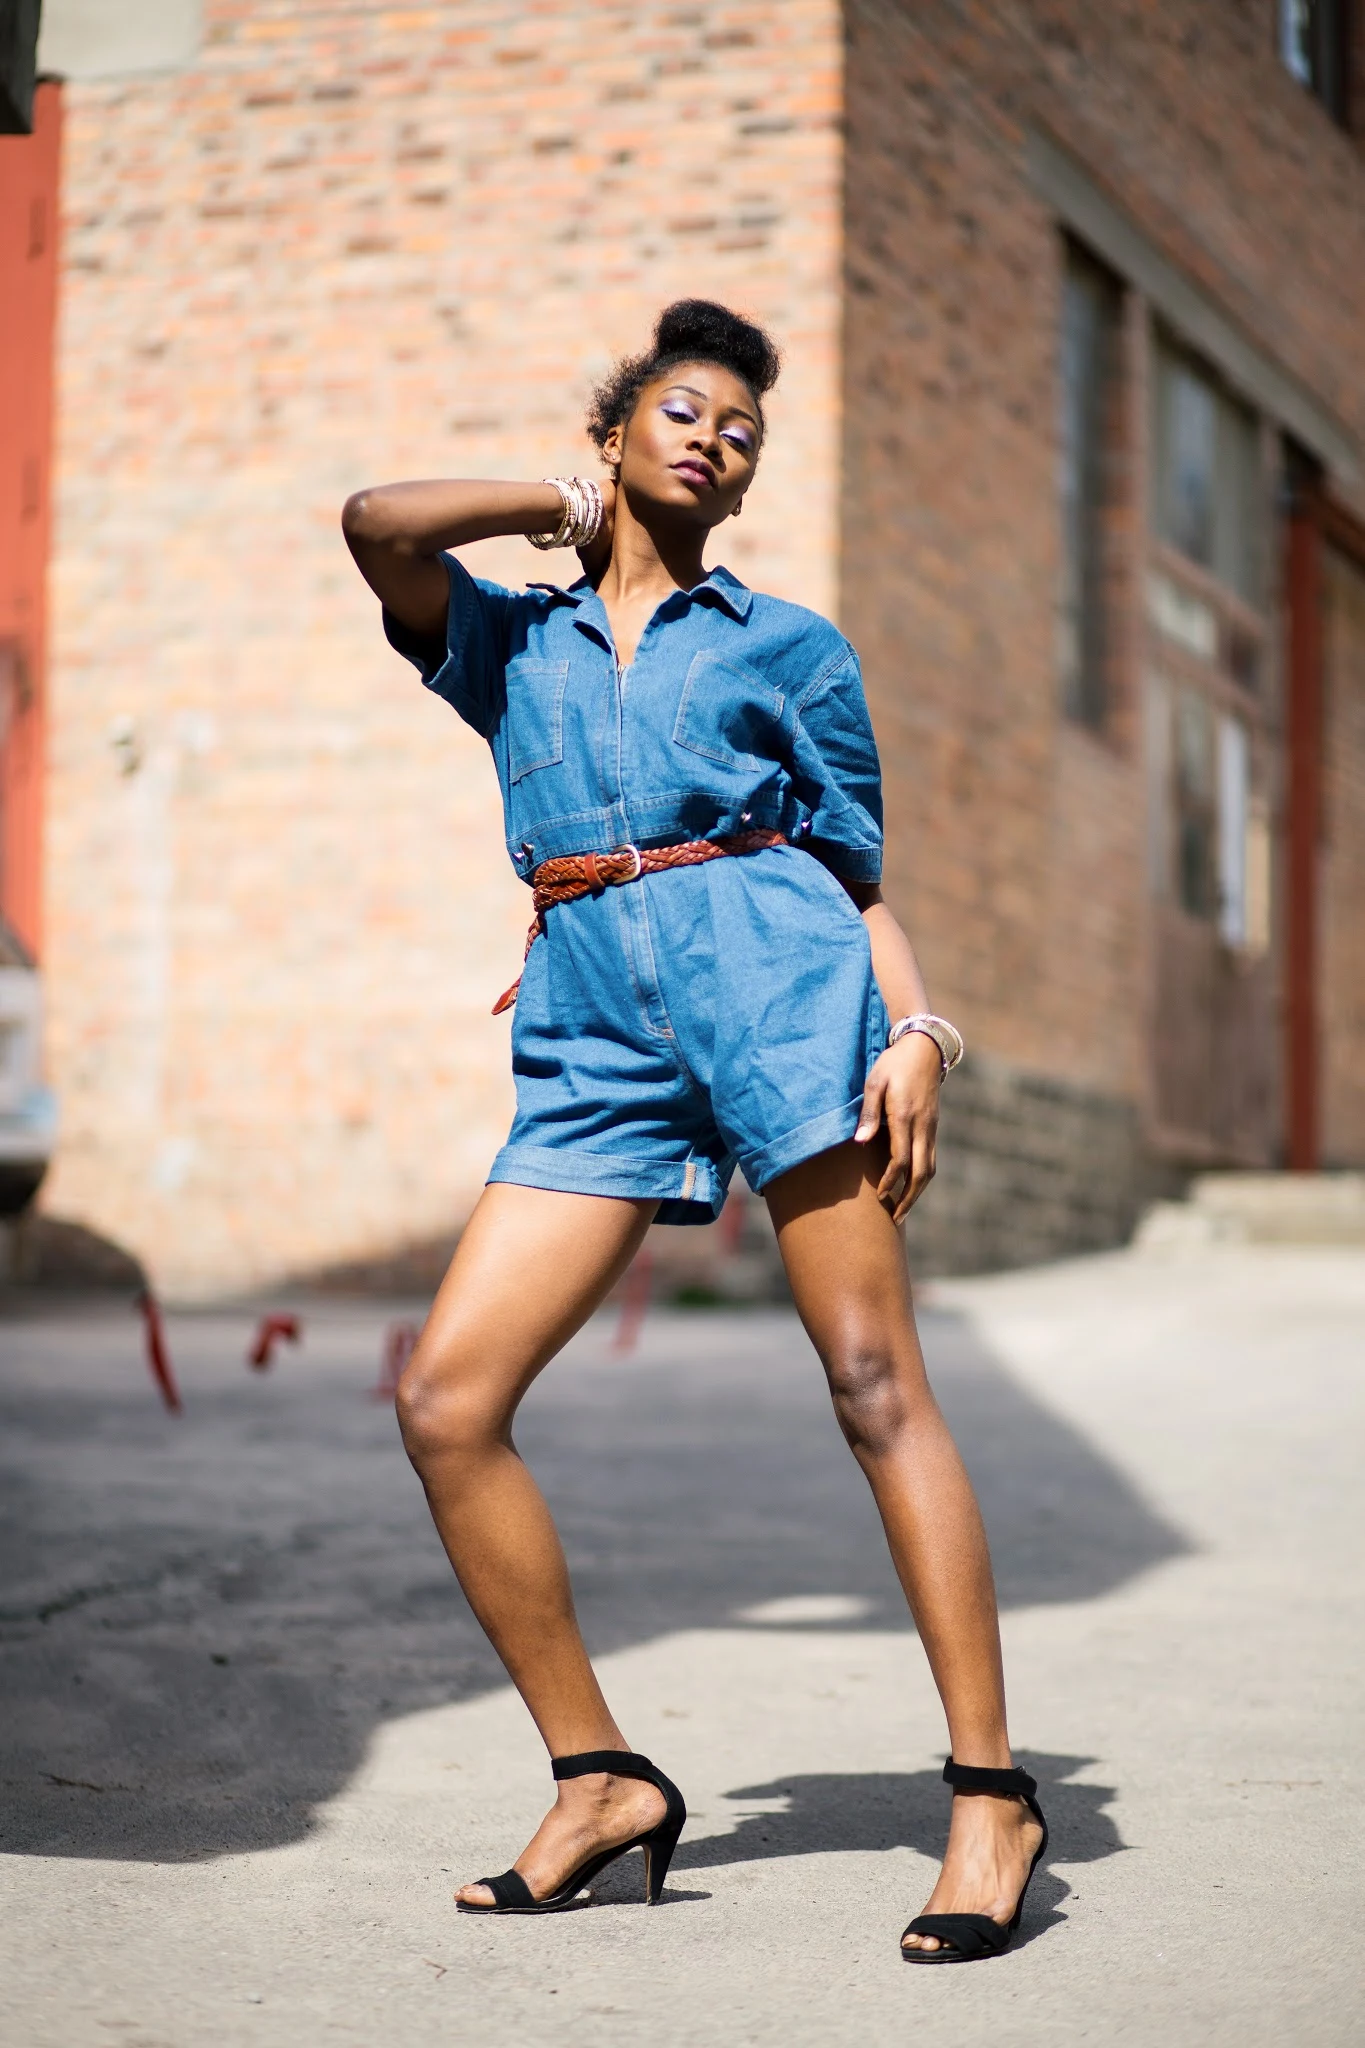 How to pose in a denim playsuit